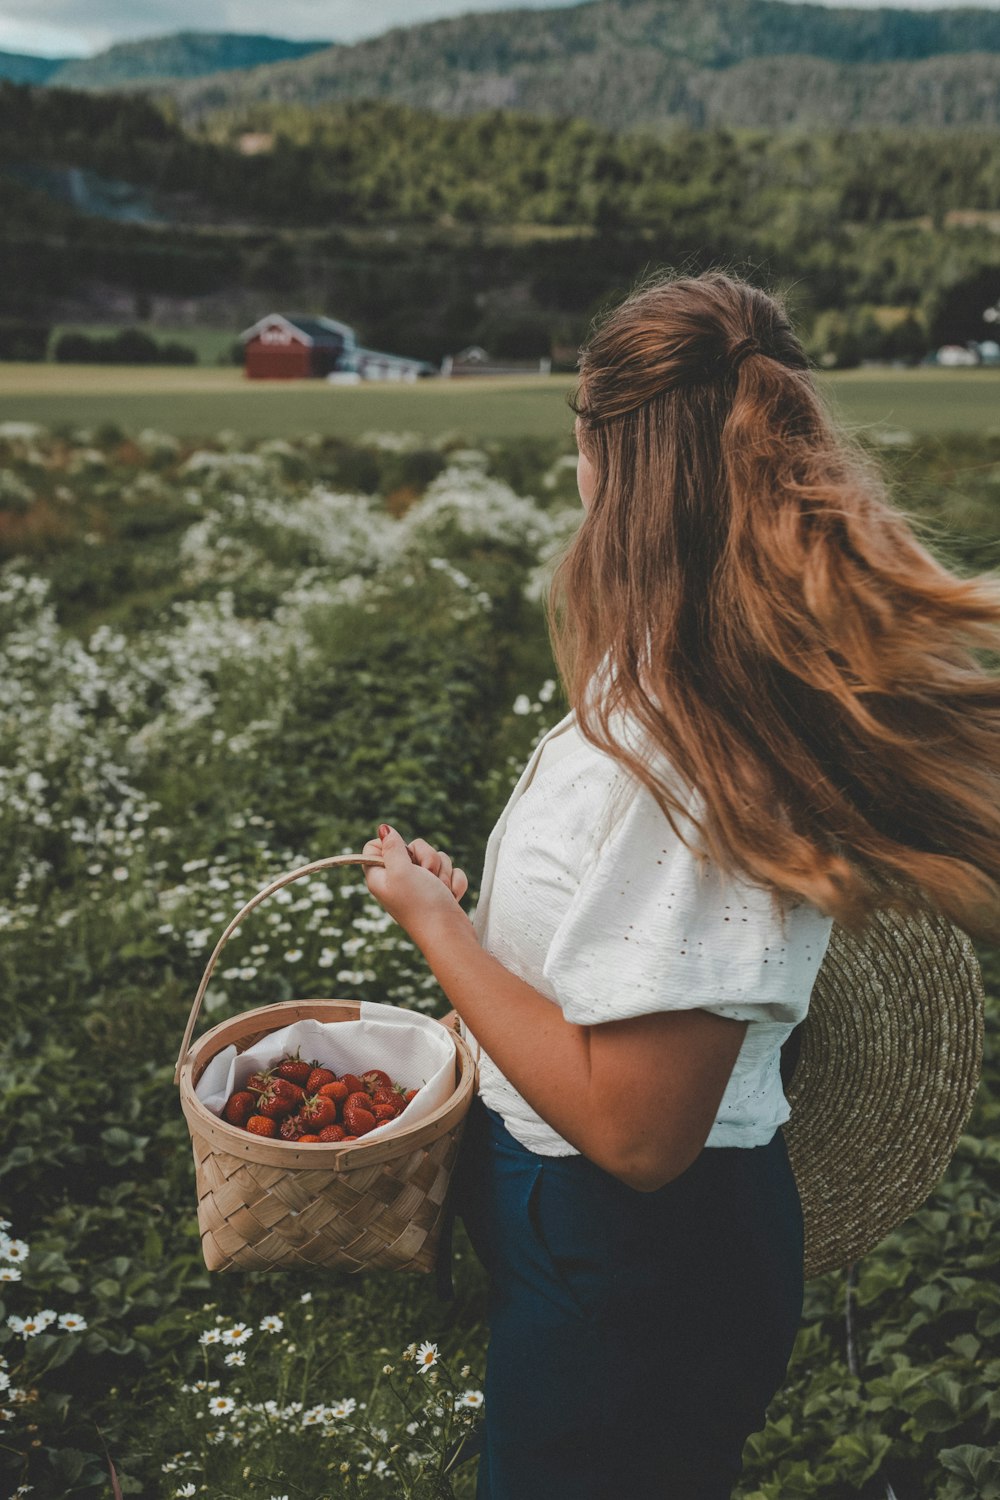 a woman holding a basket of strawberries in a field